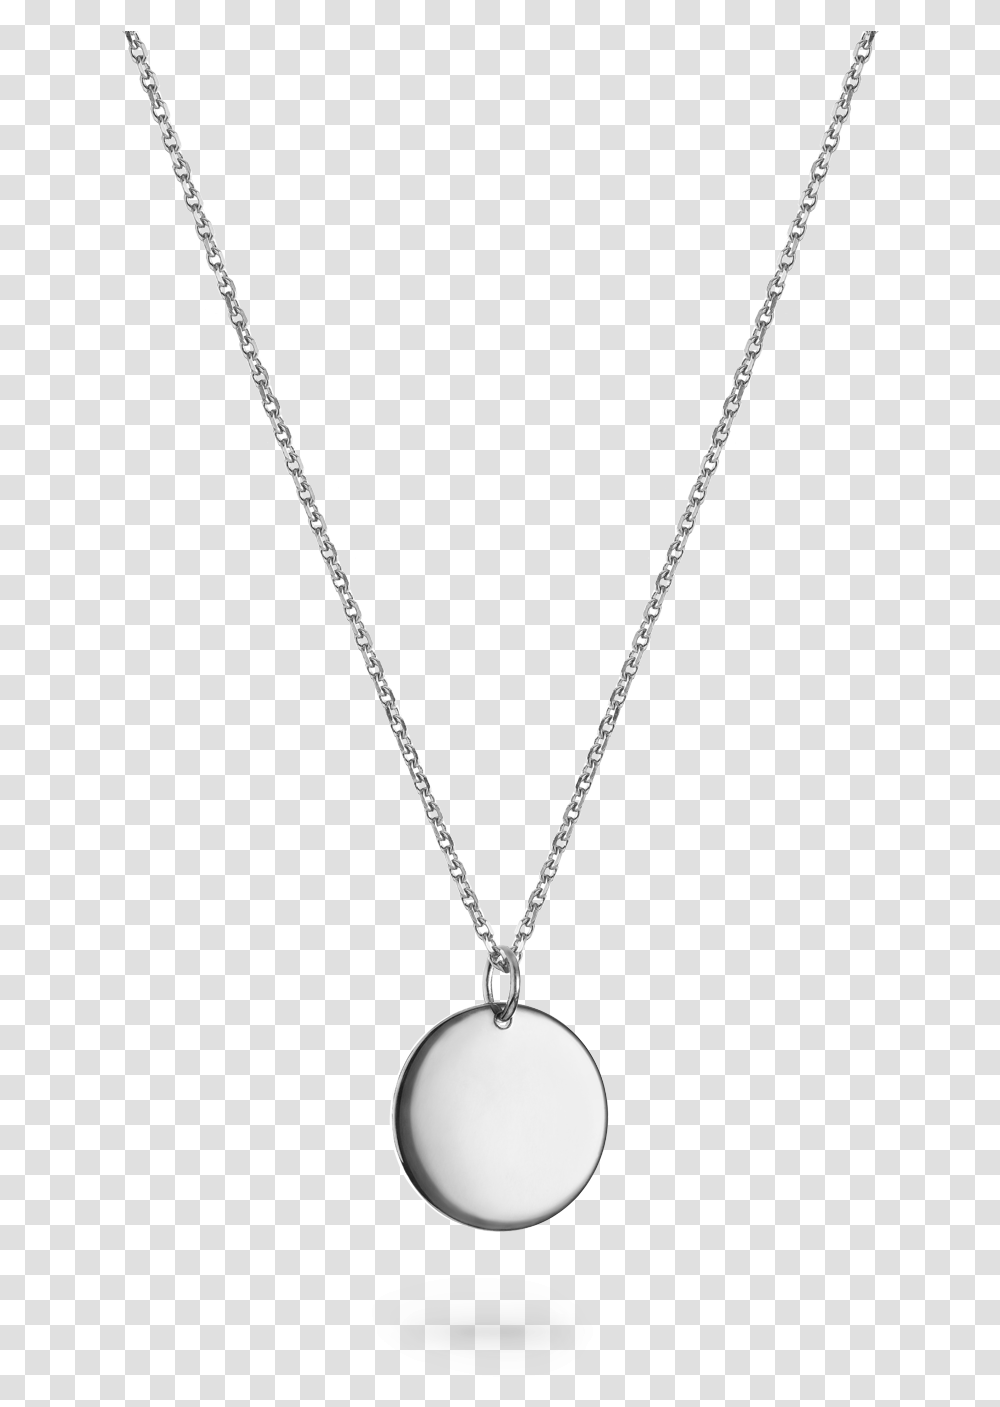 White Gold Large Round Pendant Locket, Necklace, Jewelry, Accessories, Accessory Transparent Png